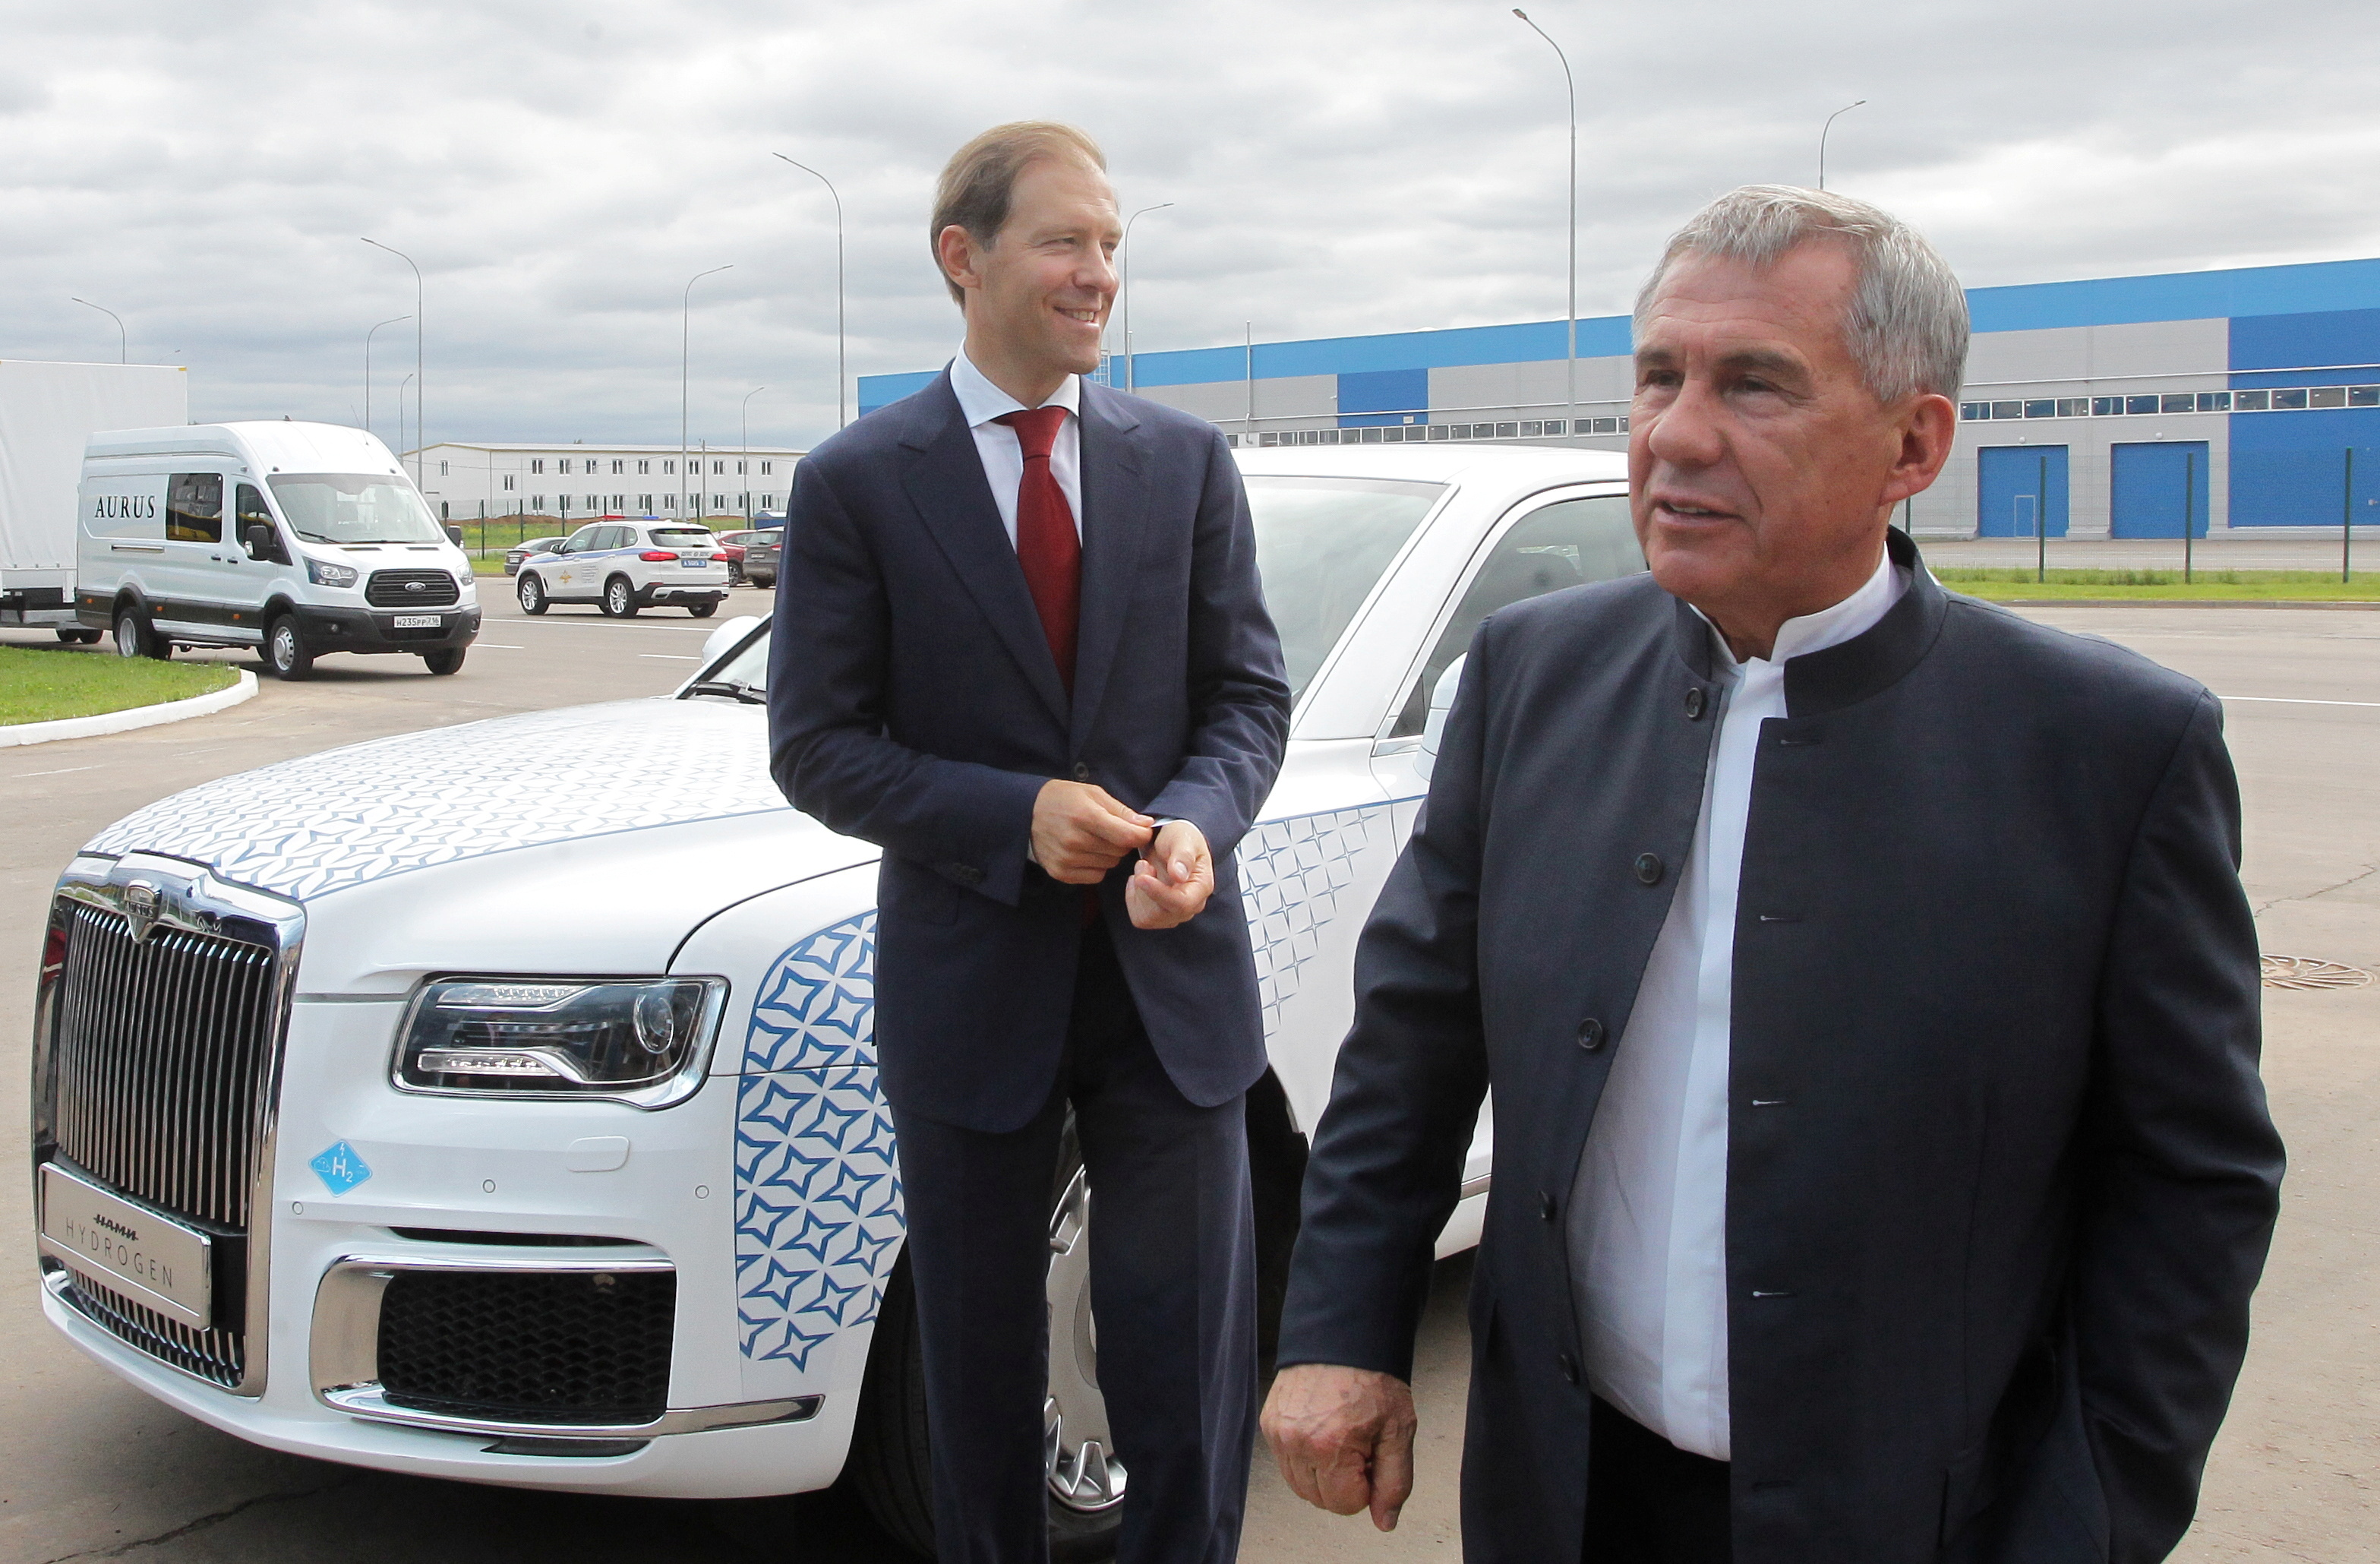 Russia's Industry and Trade Minister Manturov and President of Tatarstan Minnikhanov attend a ceremony to launch the serial production of Aurus Senat cars at a plant in Yelabuga